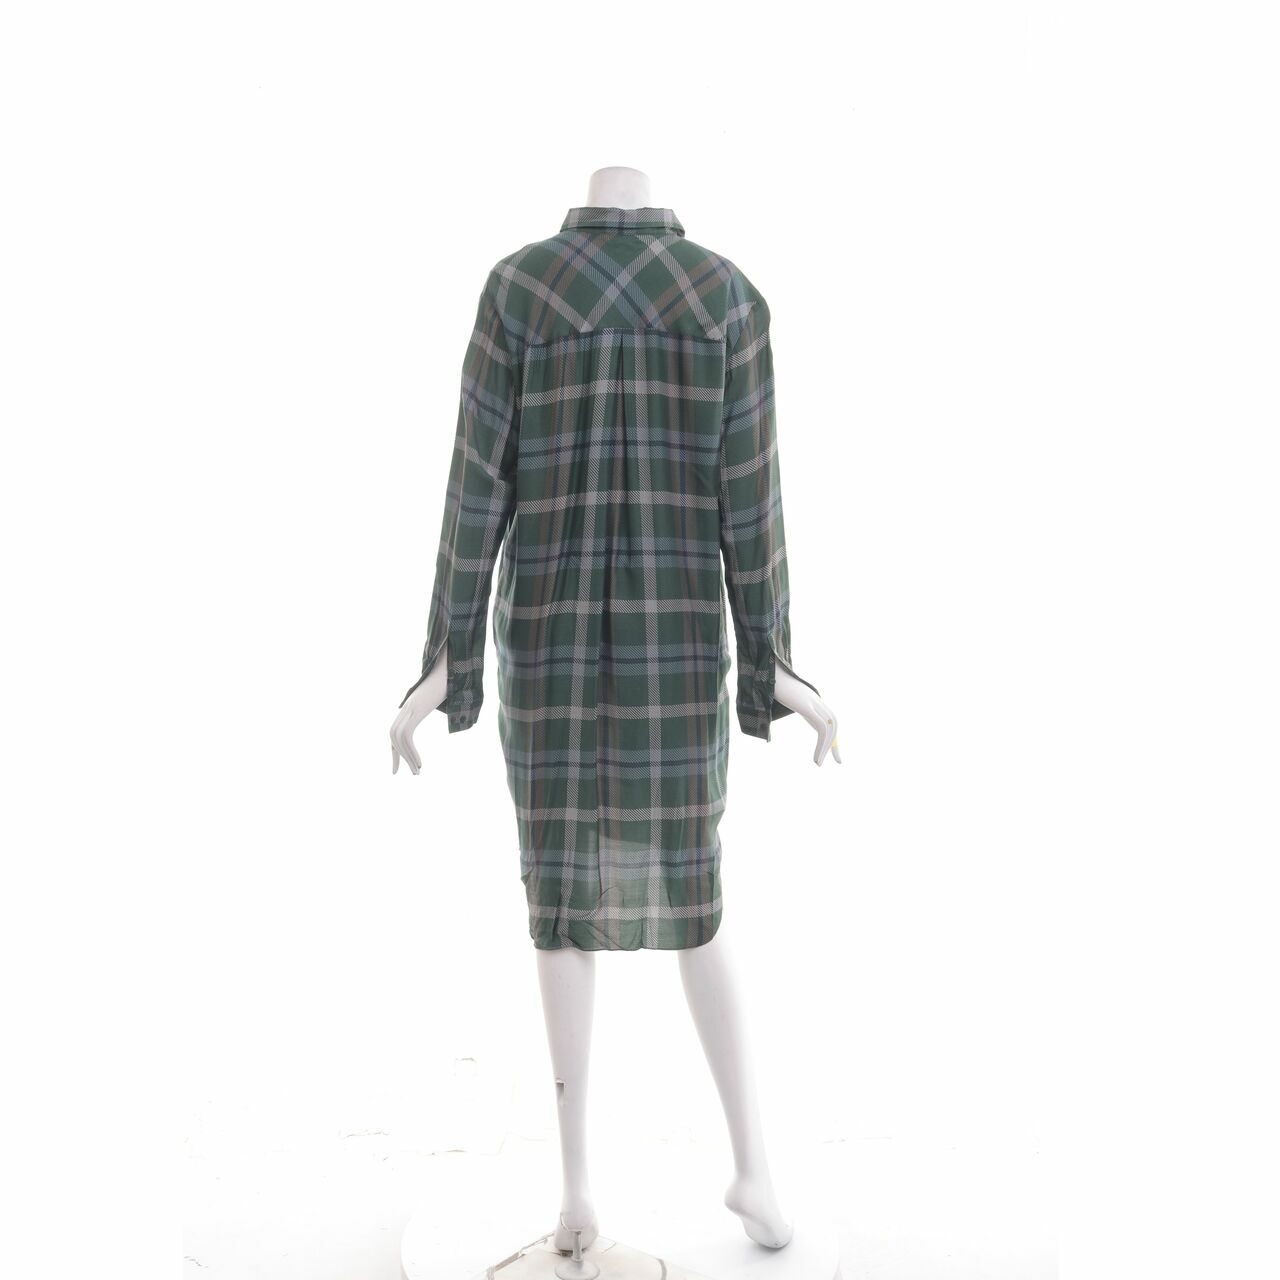 & Other Stories Multi Plaid Tunic Blouse